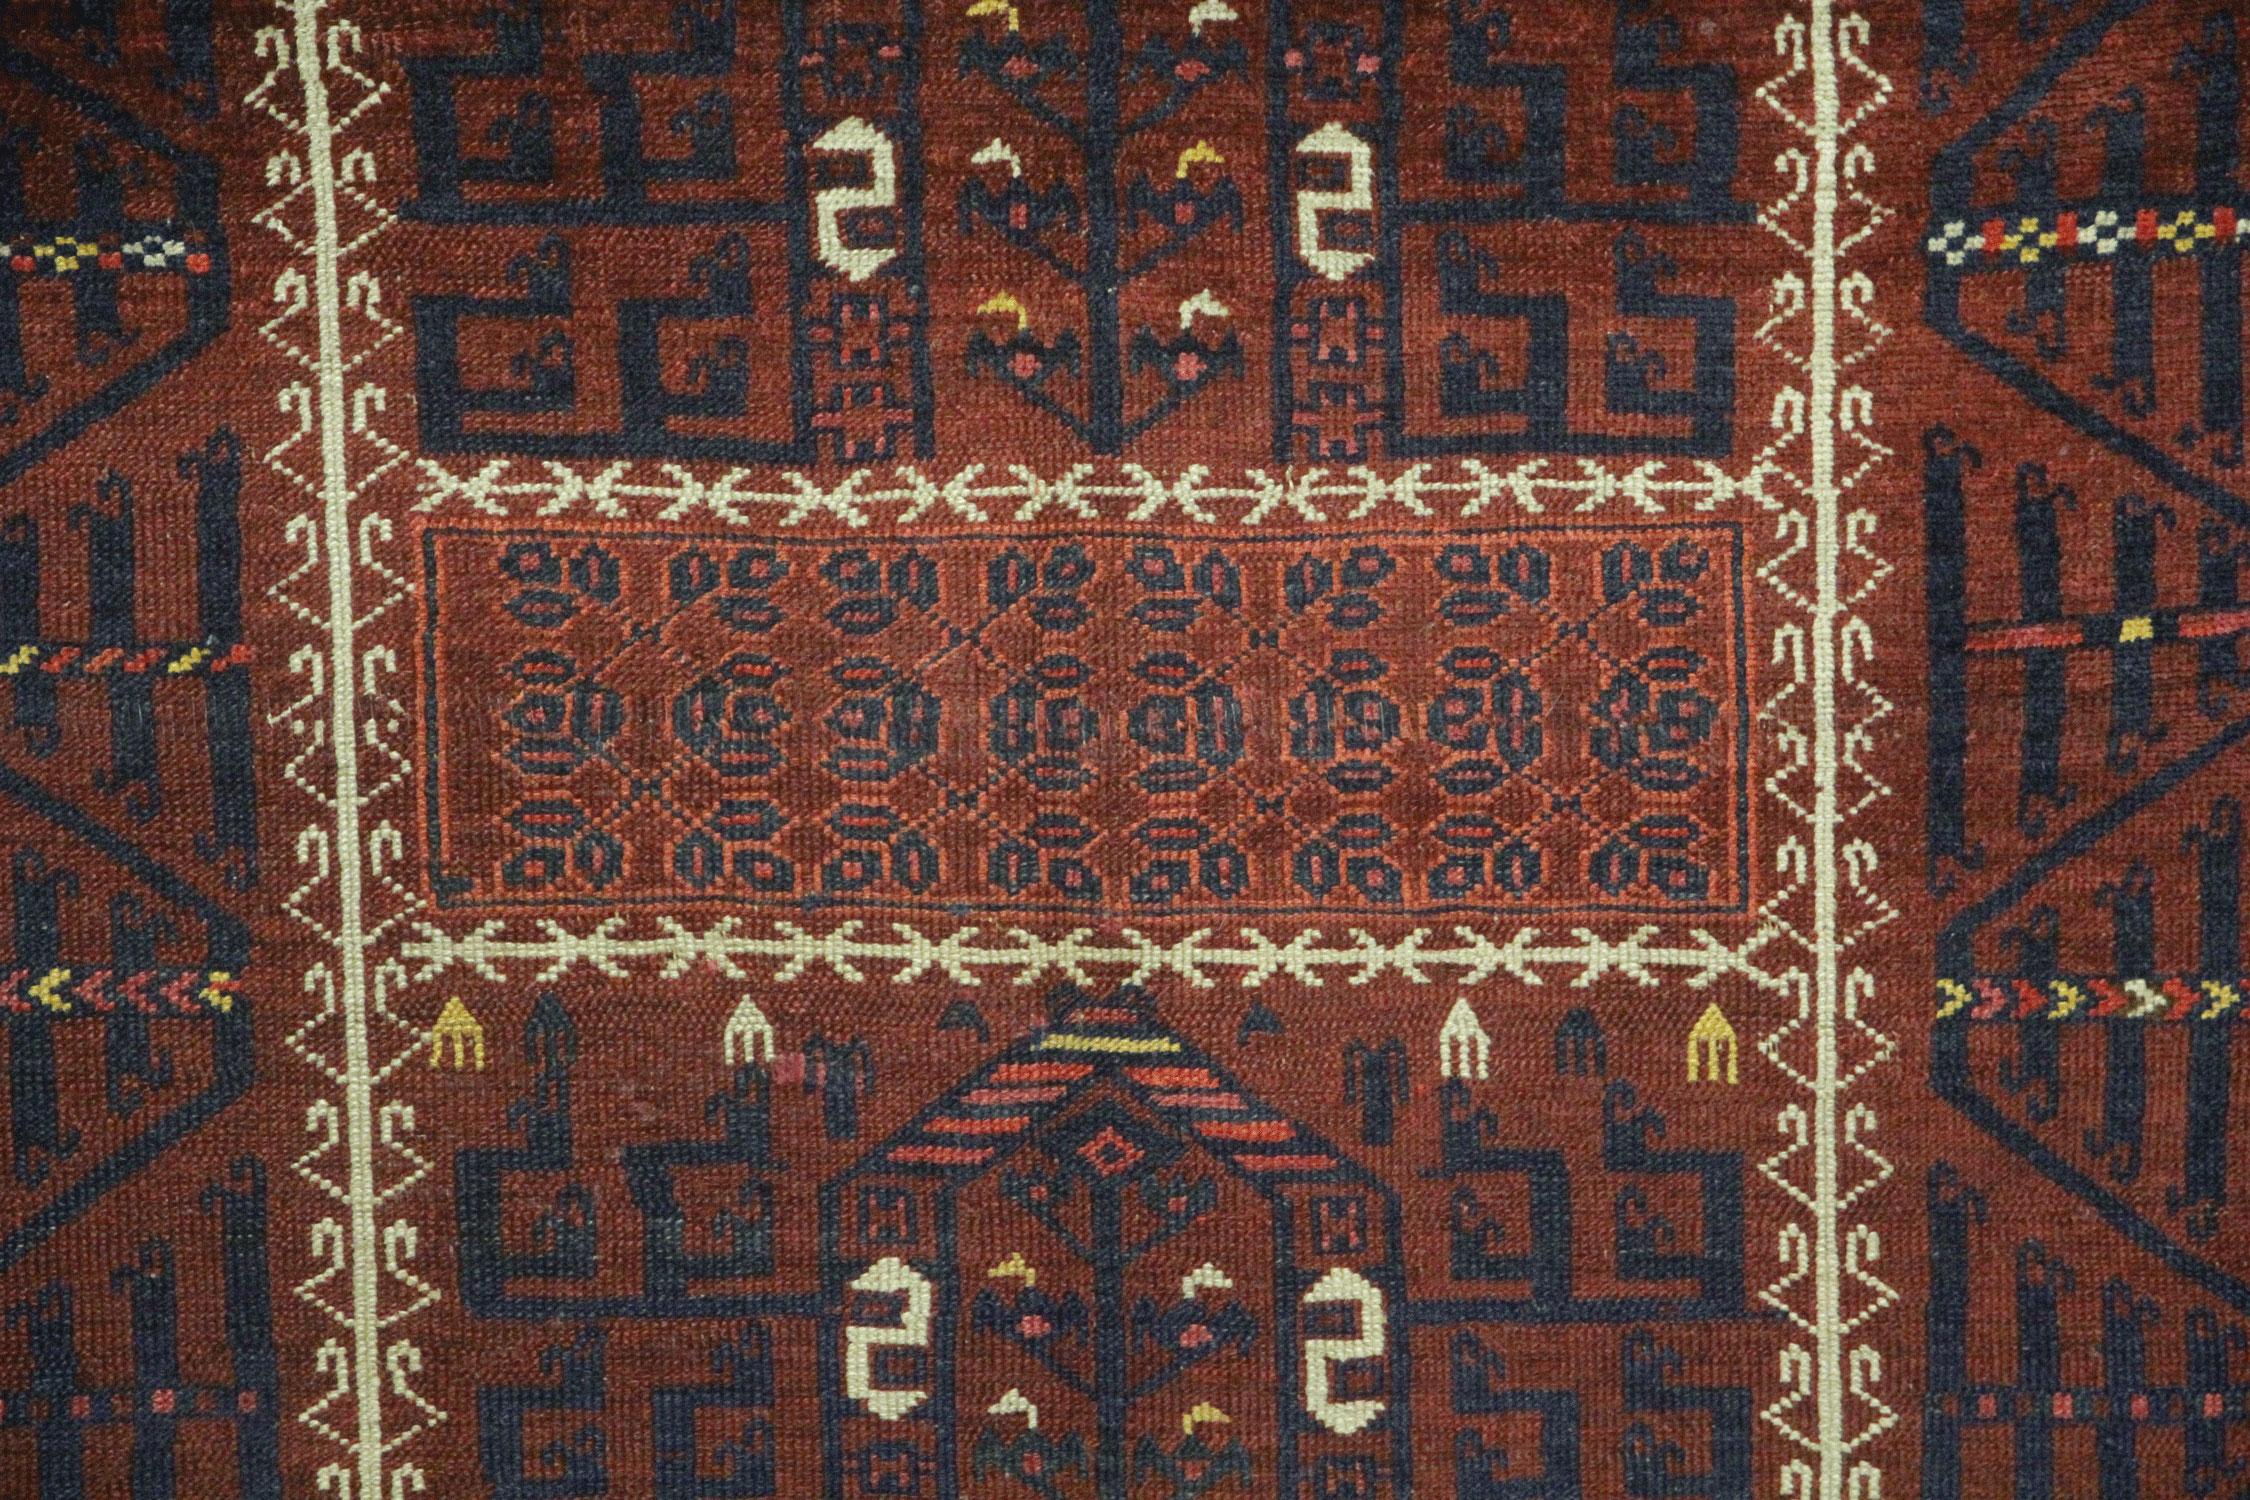 This handmade carpet Oriental rug is a beautiful antique handmade rug was handwoven by the ancient Turkmen tribe and has been completely hand-made using traditional hand-weaving techniques and coloured using only traditional vegetable dyes. This is